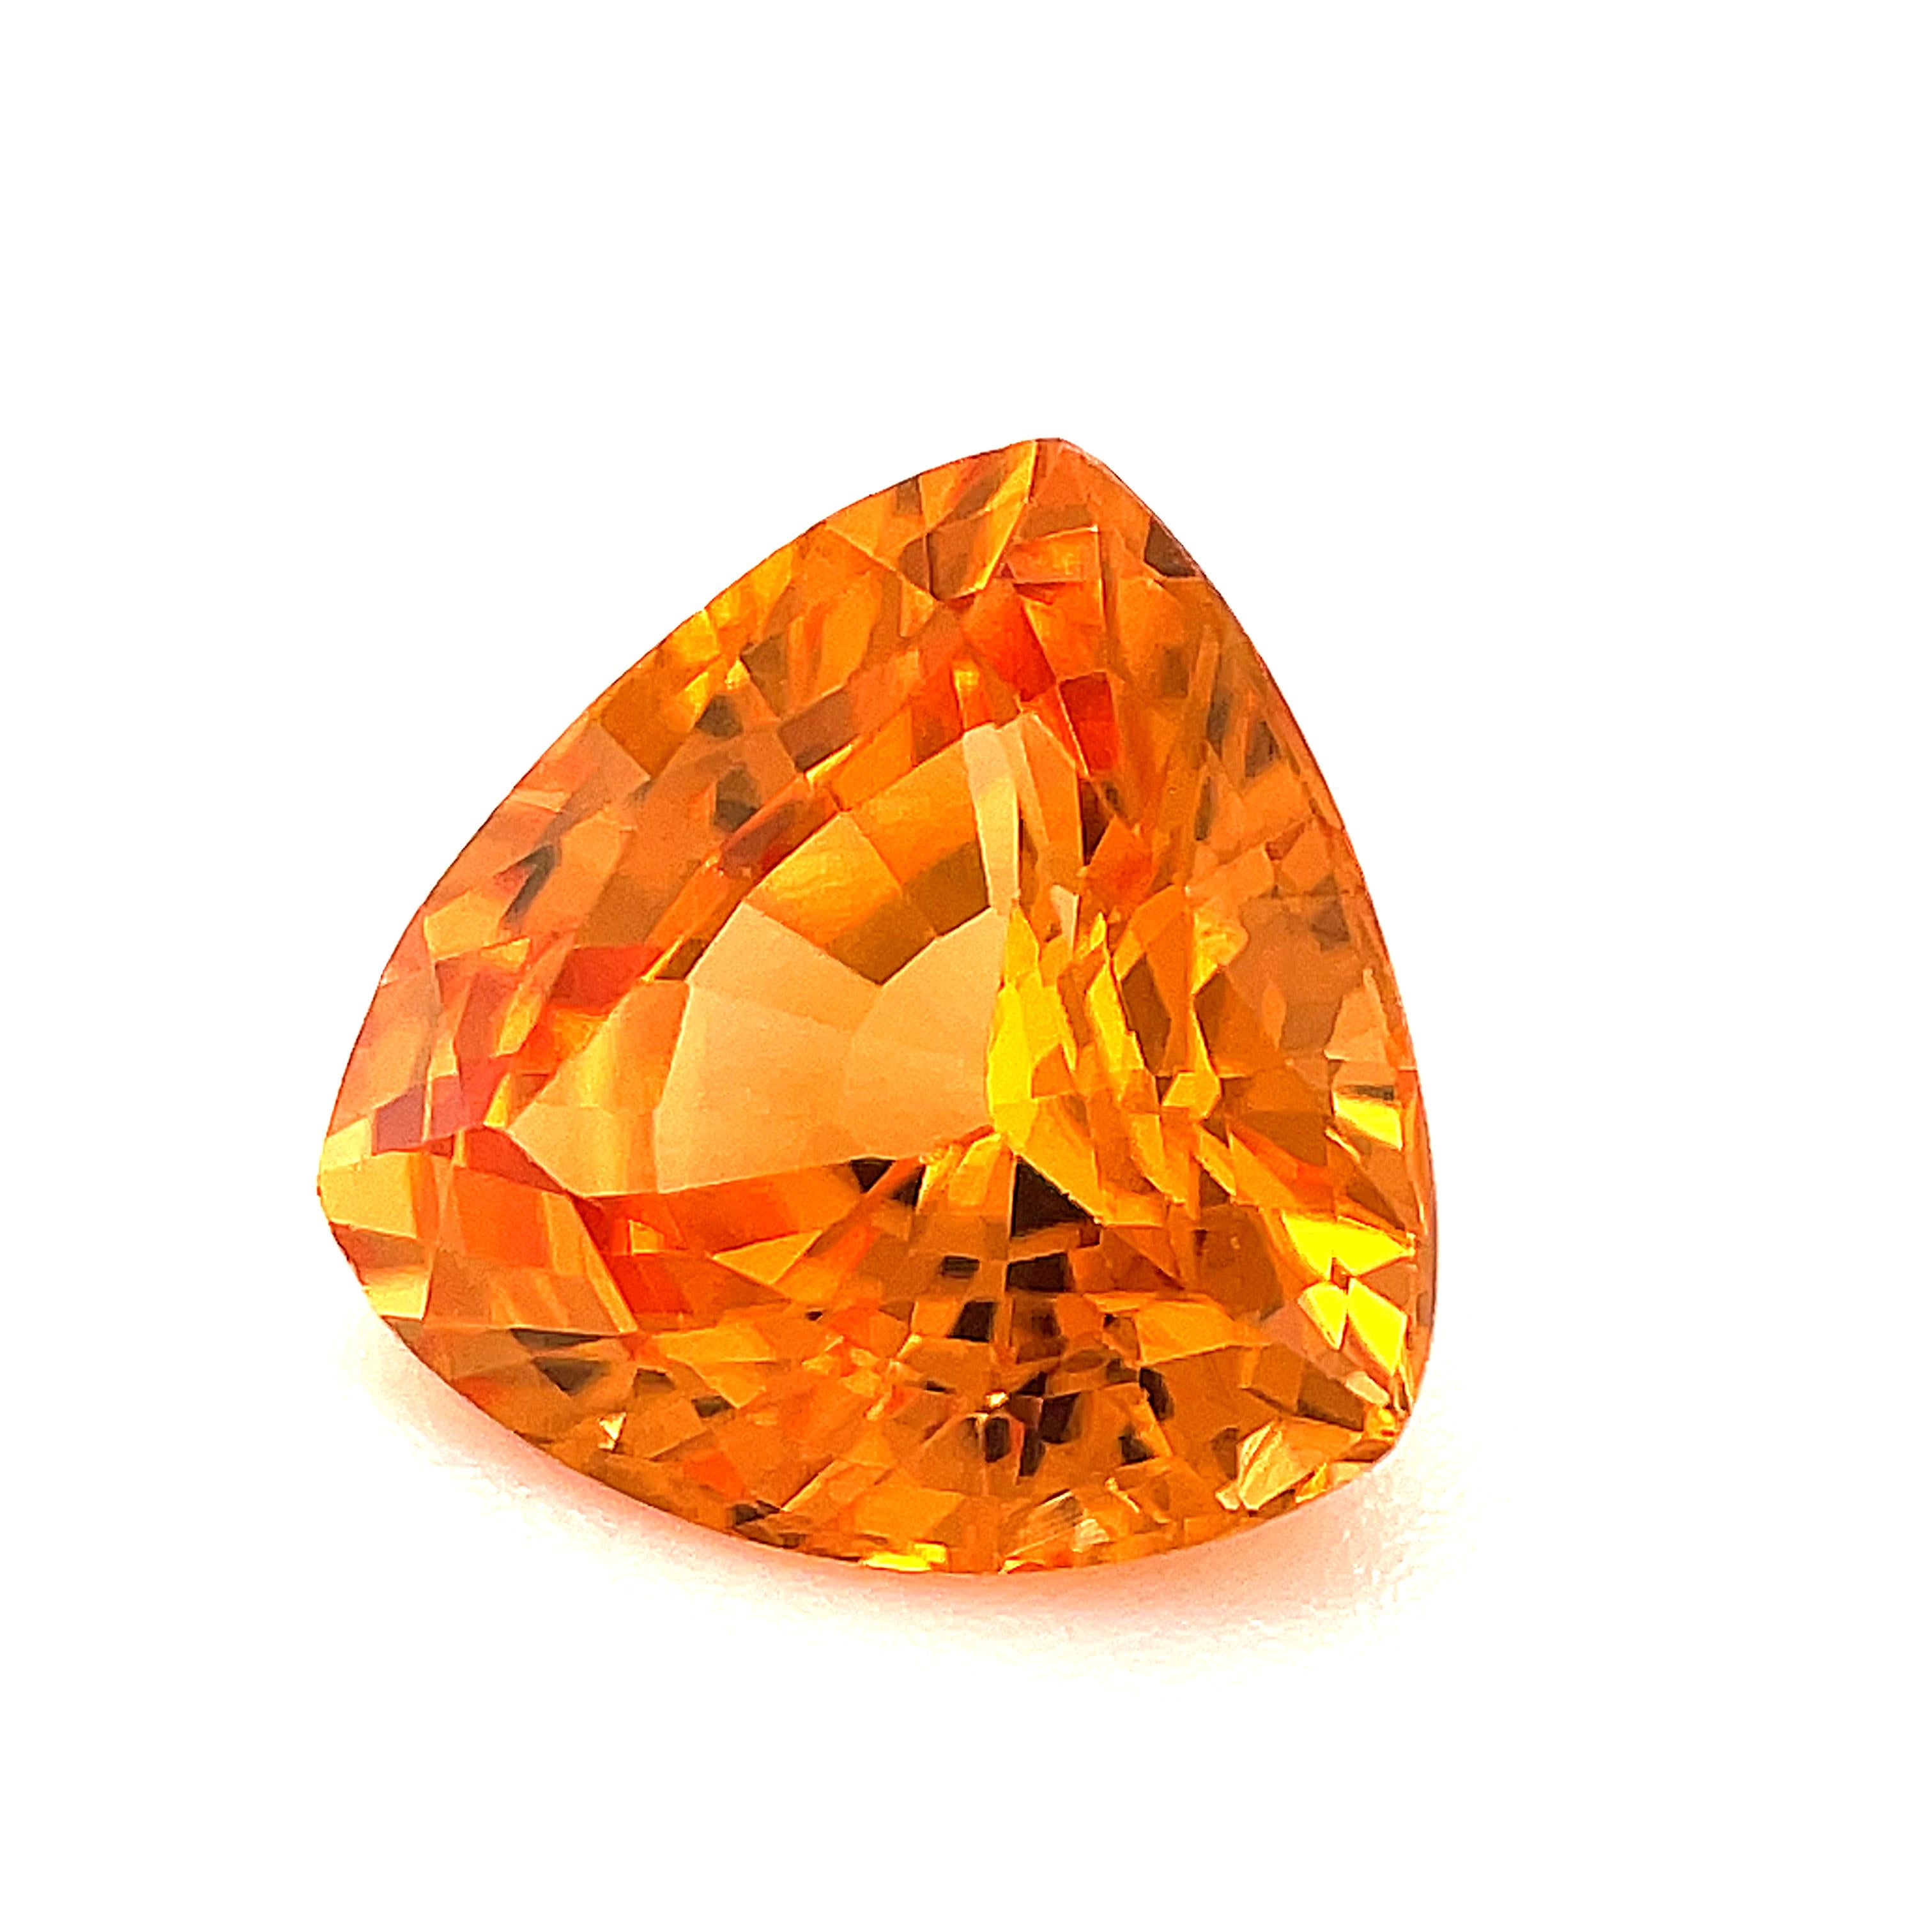 This trillion shaped spessartite garnet has a beautiful orange color and is extremely lively! Measuring 7.73 x 7.52 x 7.51 millimeters (measured in the way the height of a triangle is measured in geometry), with a depth of 4.52 millimeters, this is